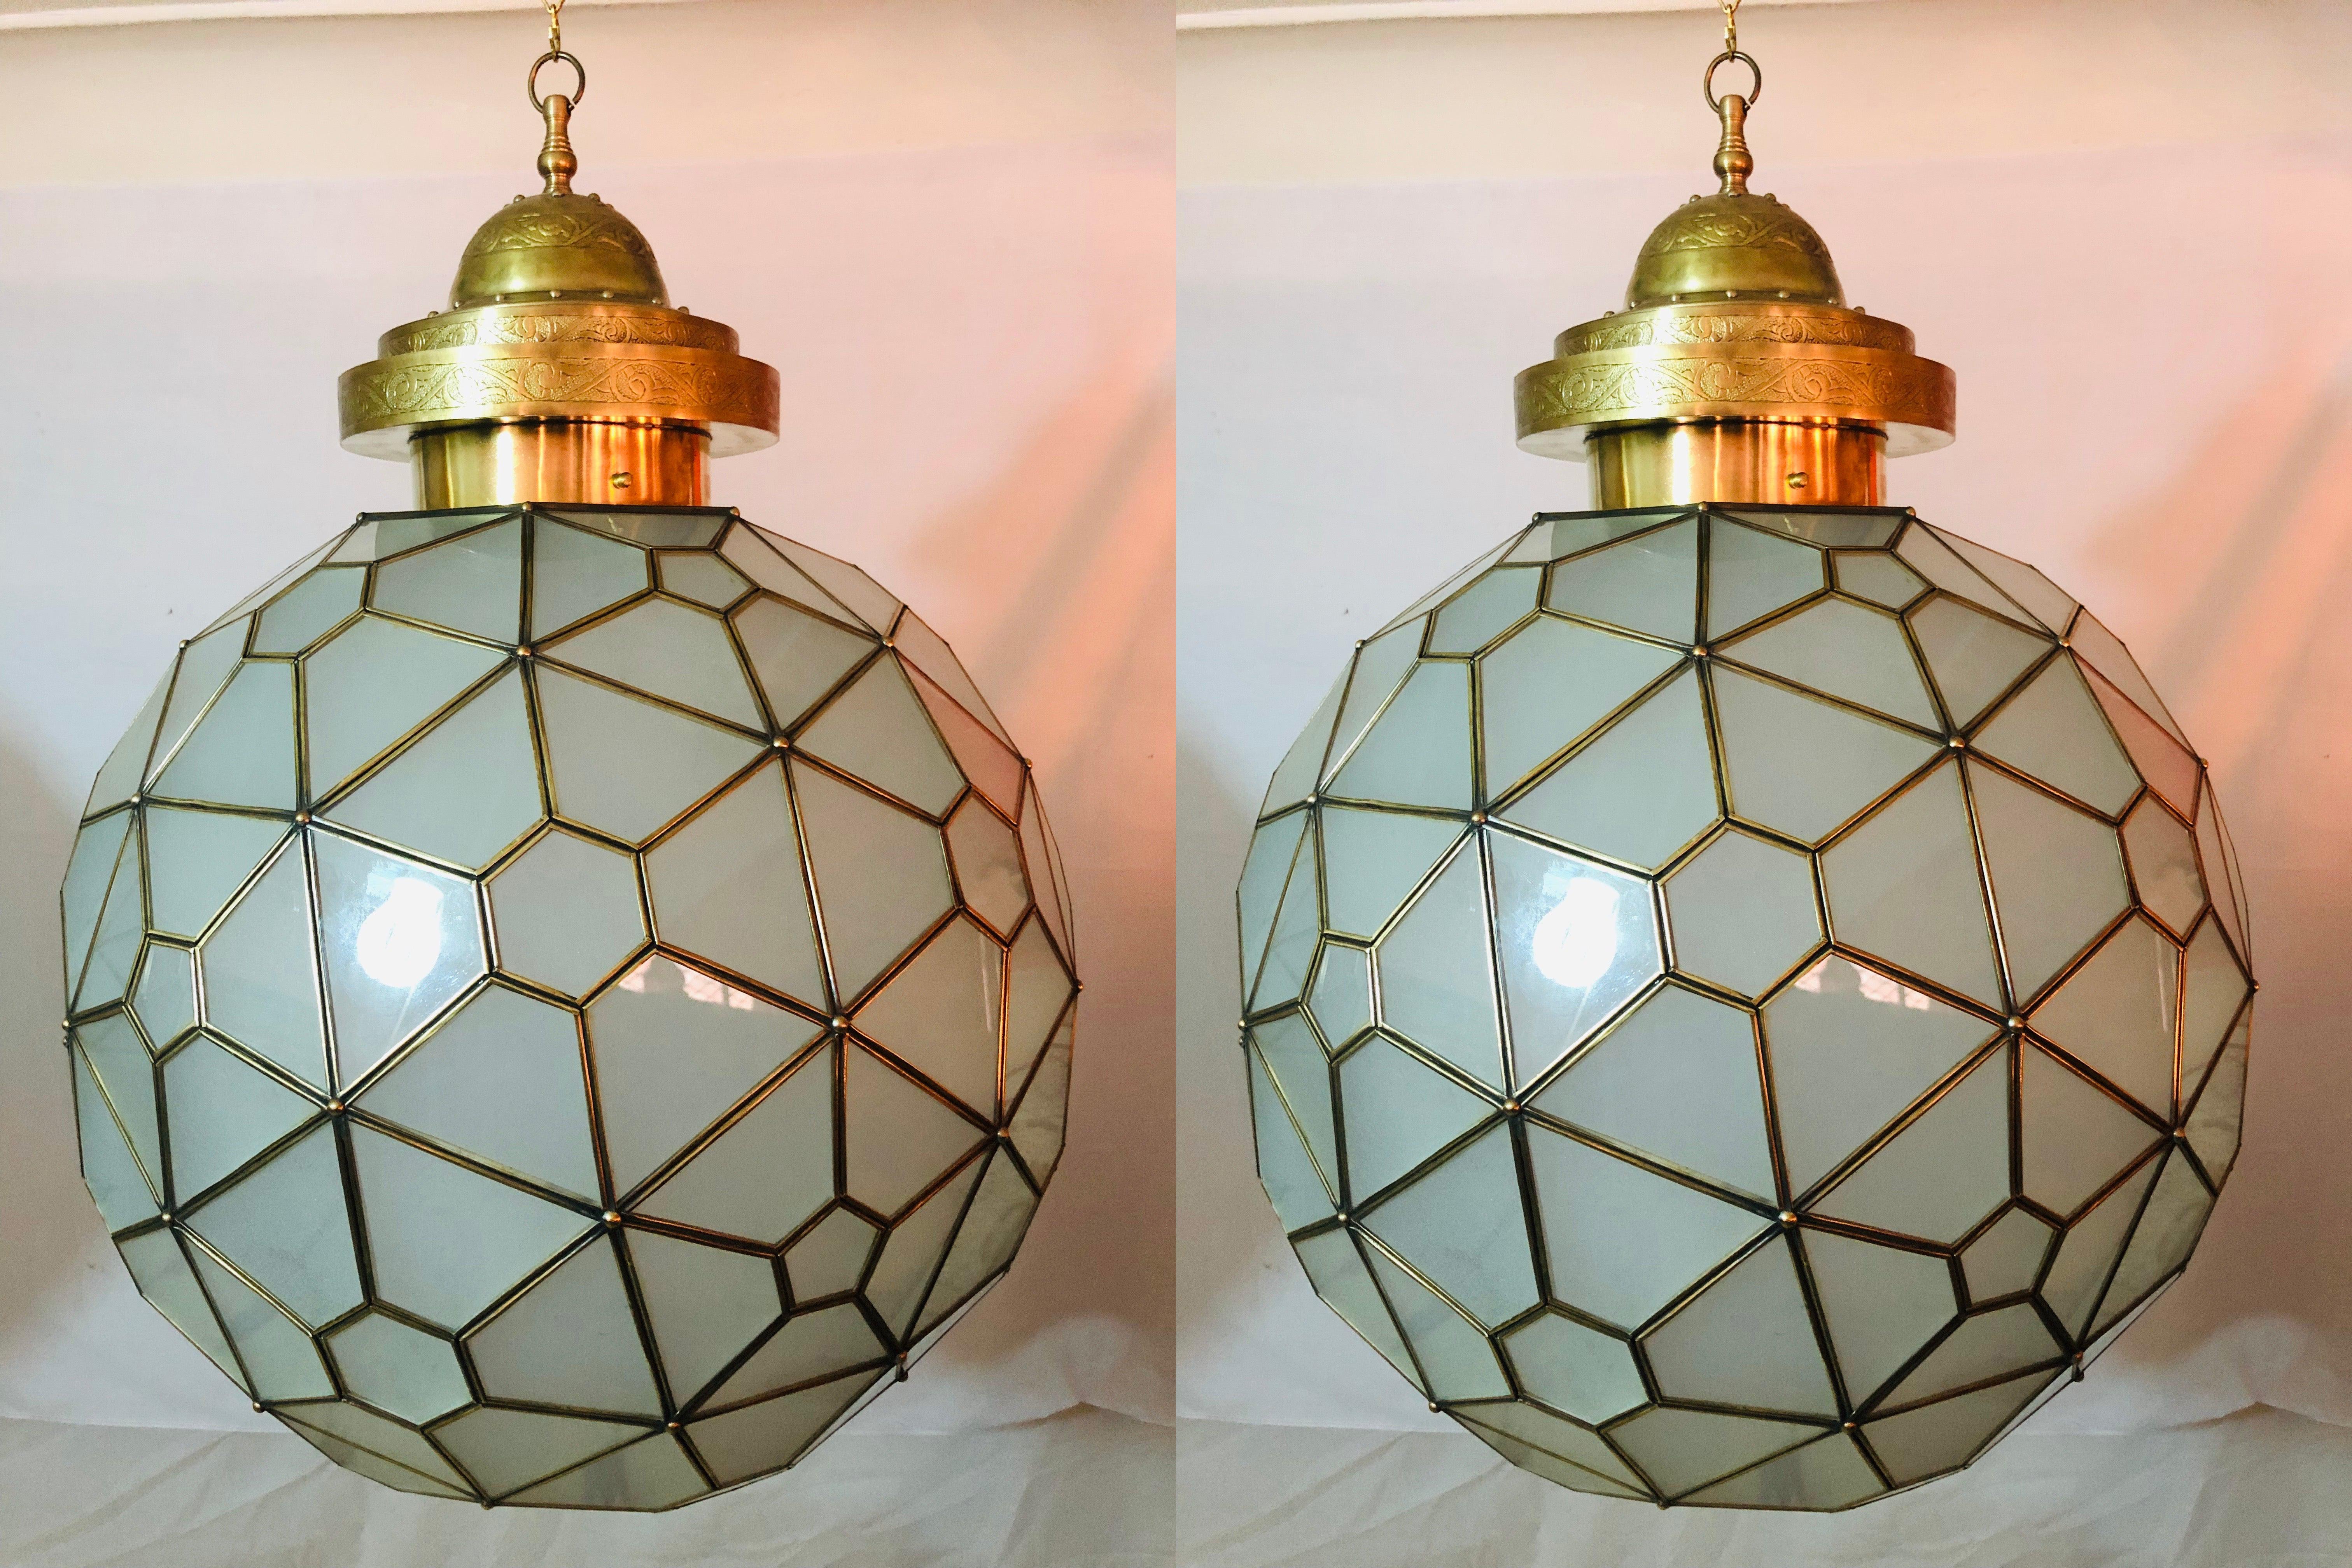 A pair of Art Deco style chandelier or pendant globe in globe shaped made of milk glass and brass.

Light up your room with this stunning handmade pair of Art Deco style globe round form milk glass white chandeliers or lanterns with brass inlay